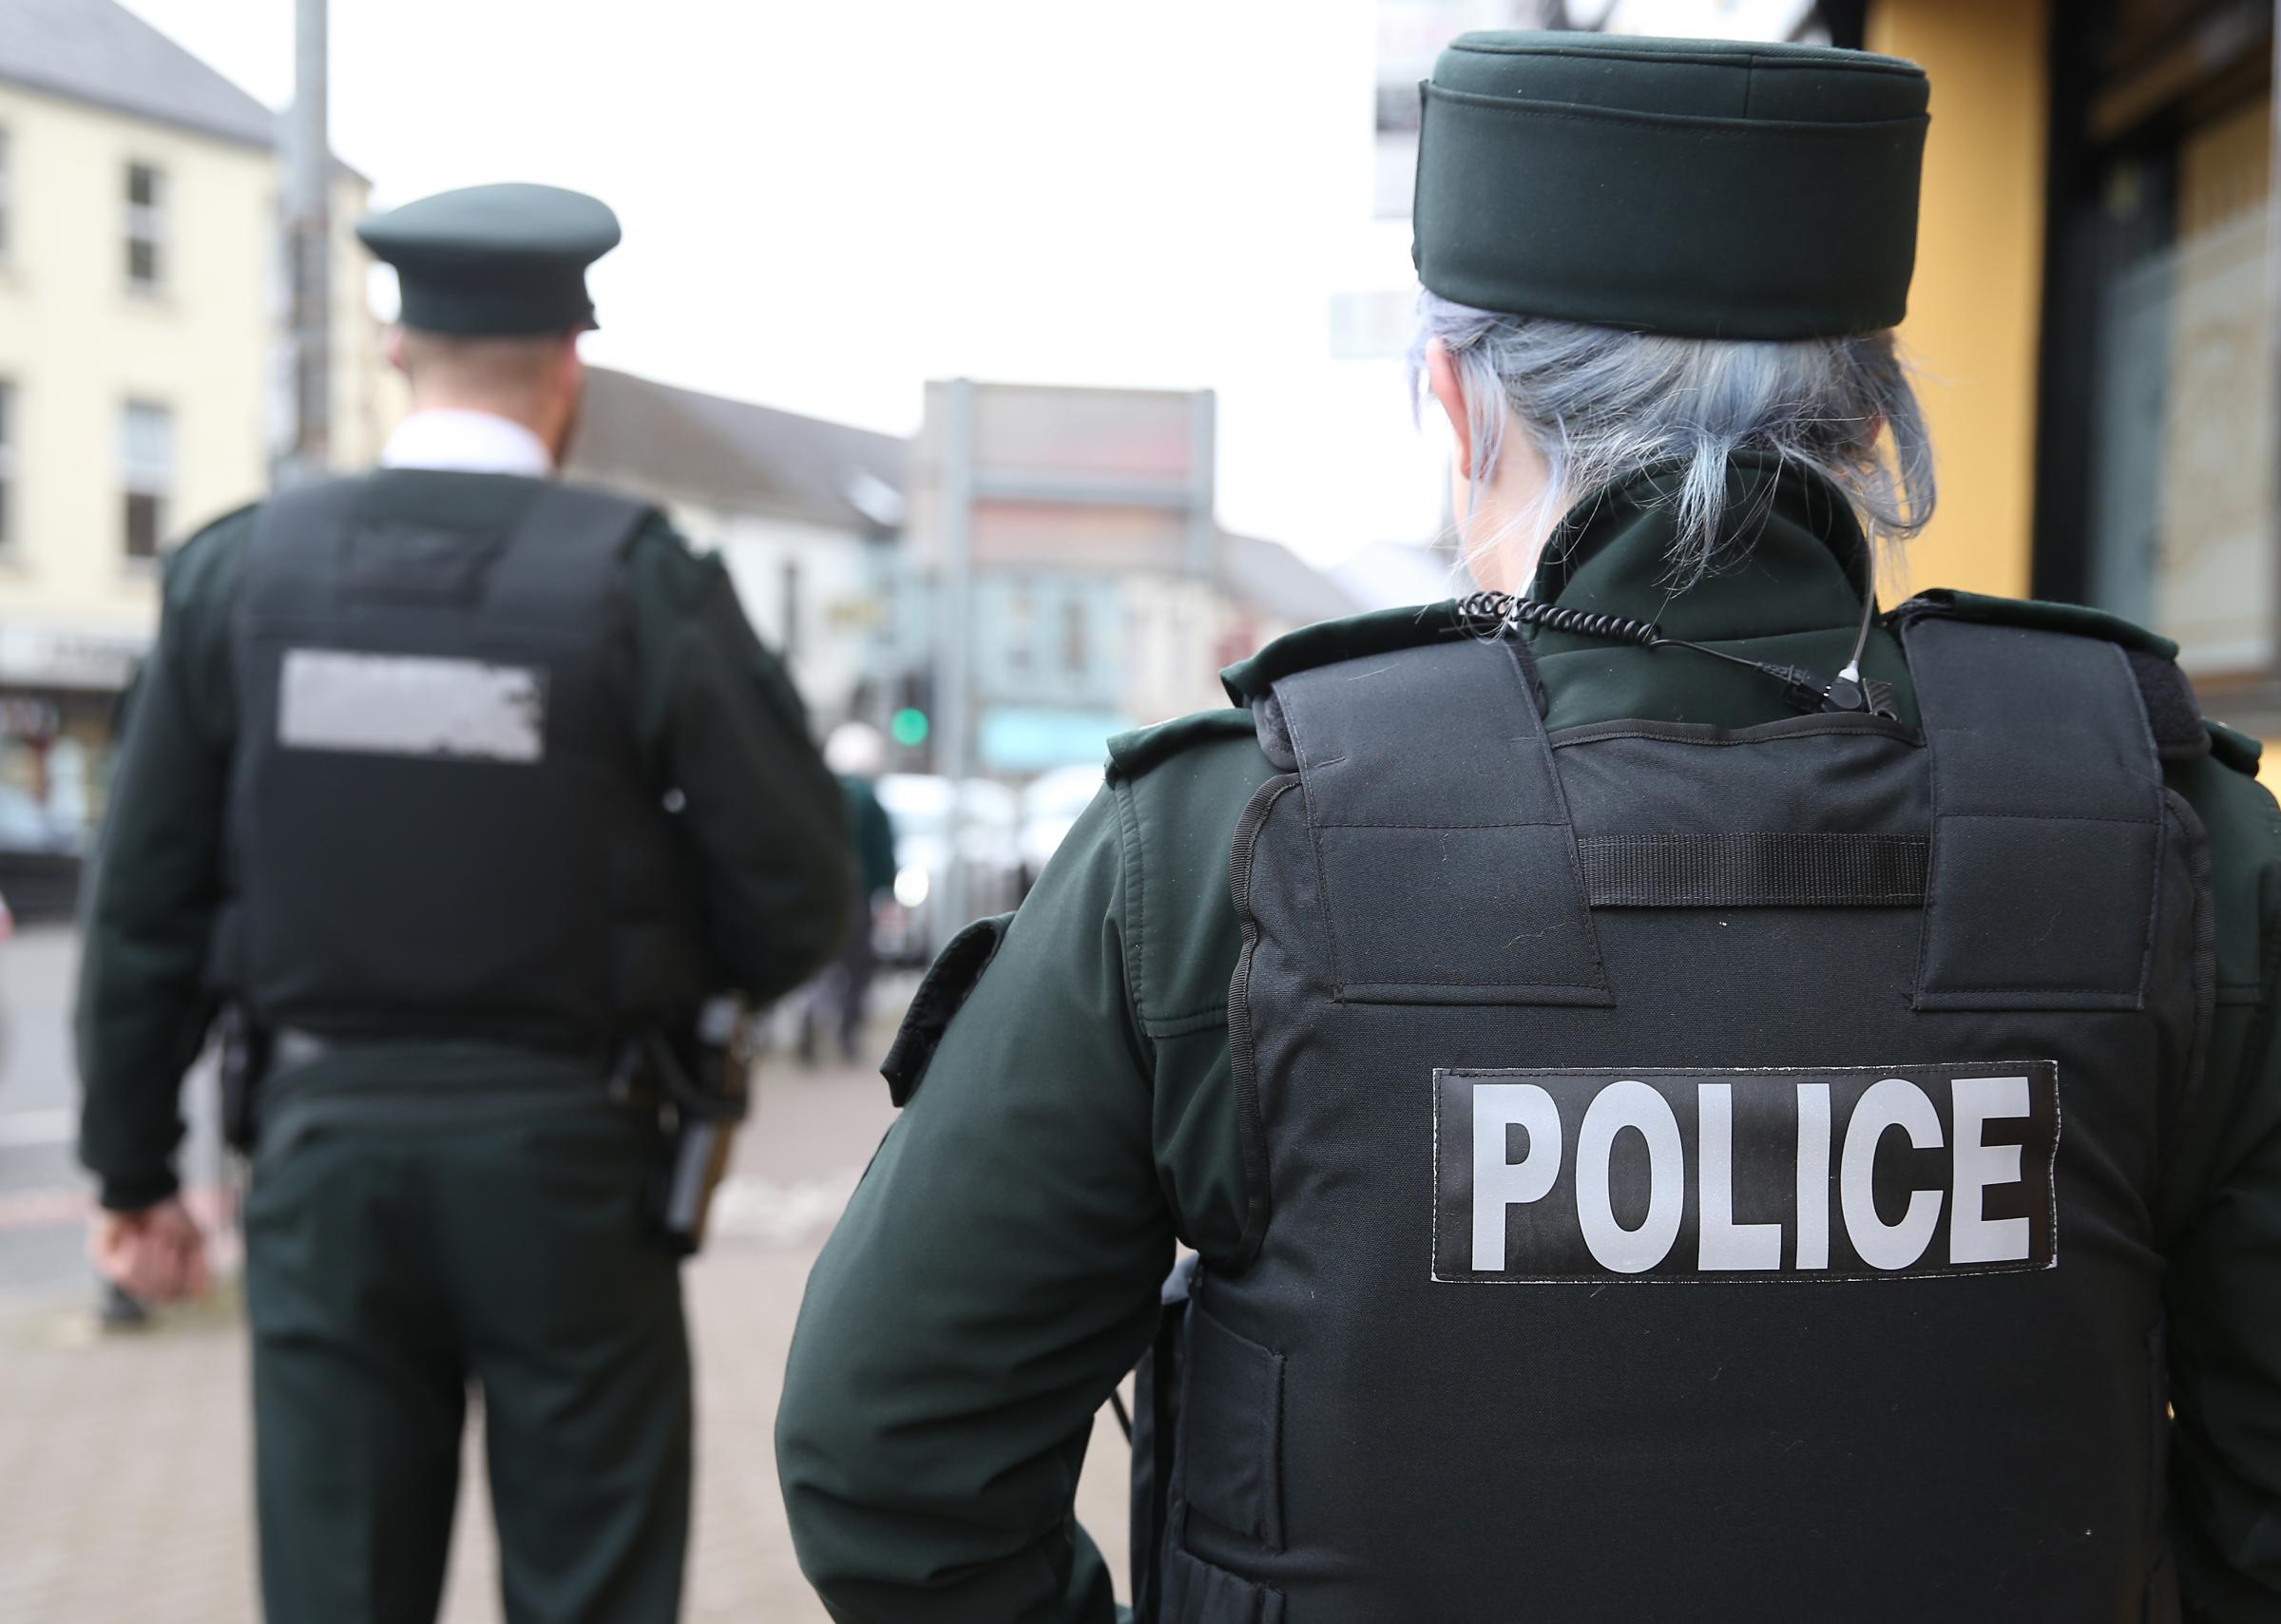 Man arrested in Fermanagh on suspicion of intent to supply Class-B drugs